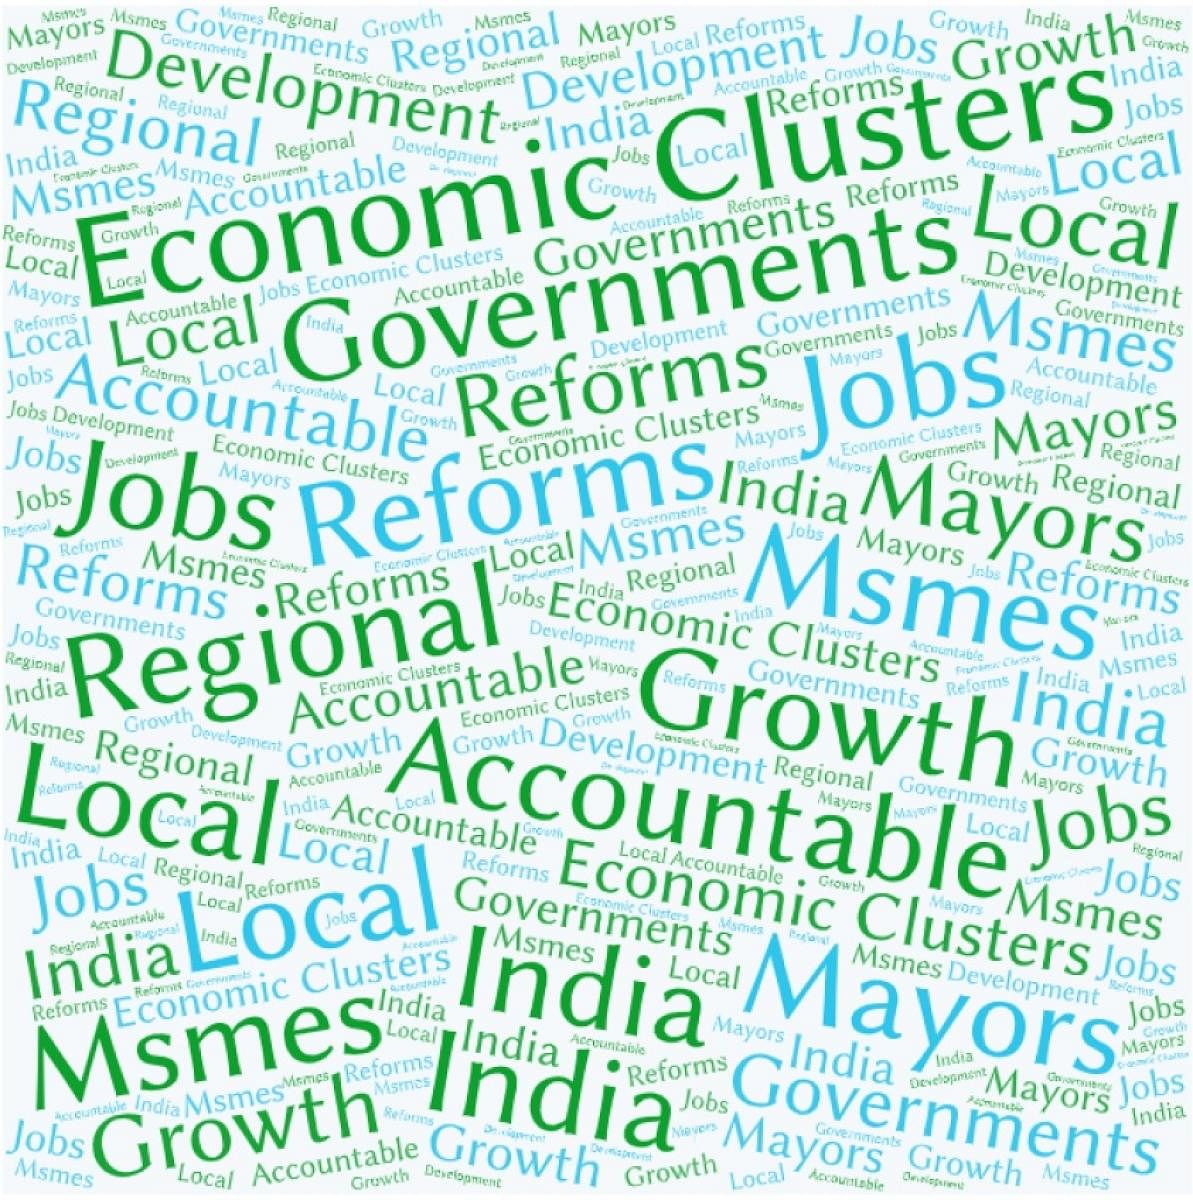 Reimagining India in economic clusters to boost growth